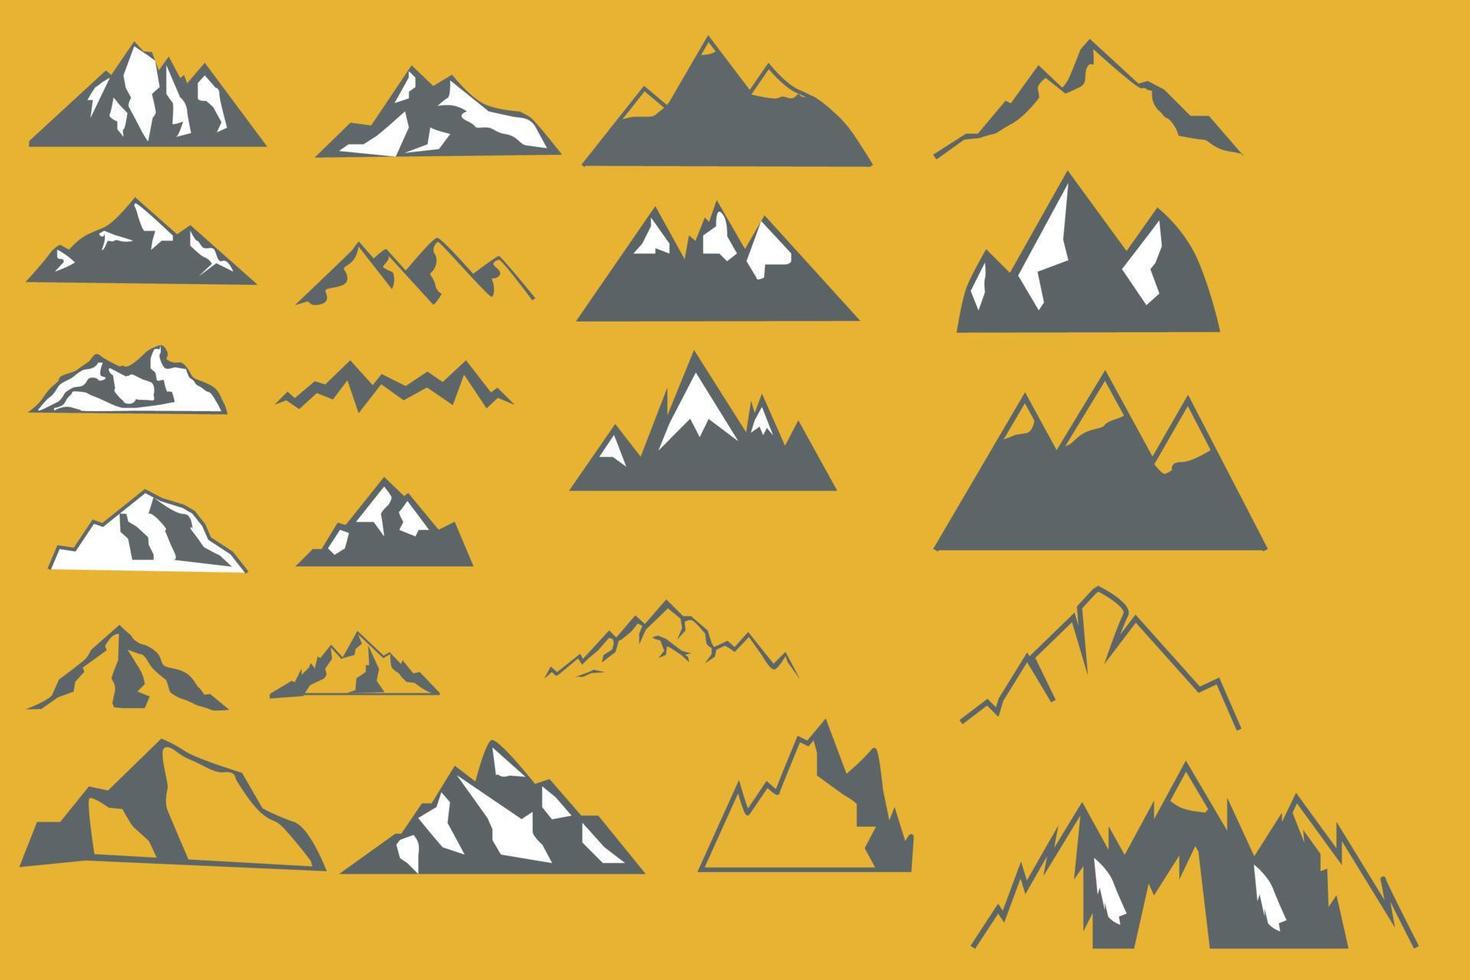 vector silhouette icon, rocky mountain black color various shapes. set of mountains, hills, hills